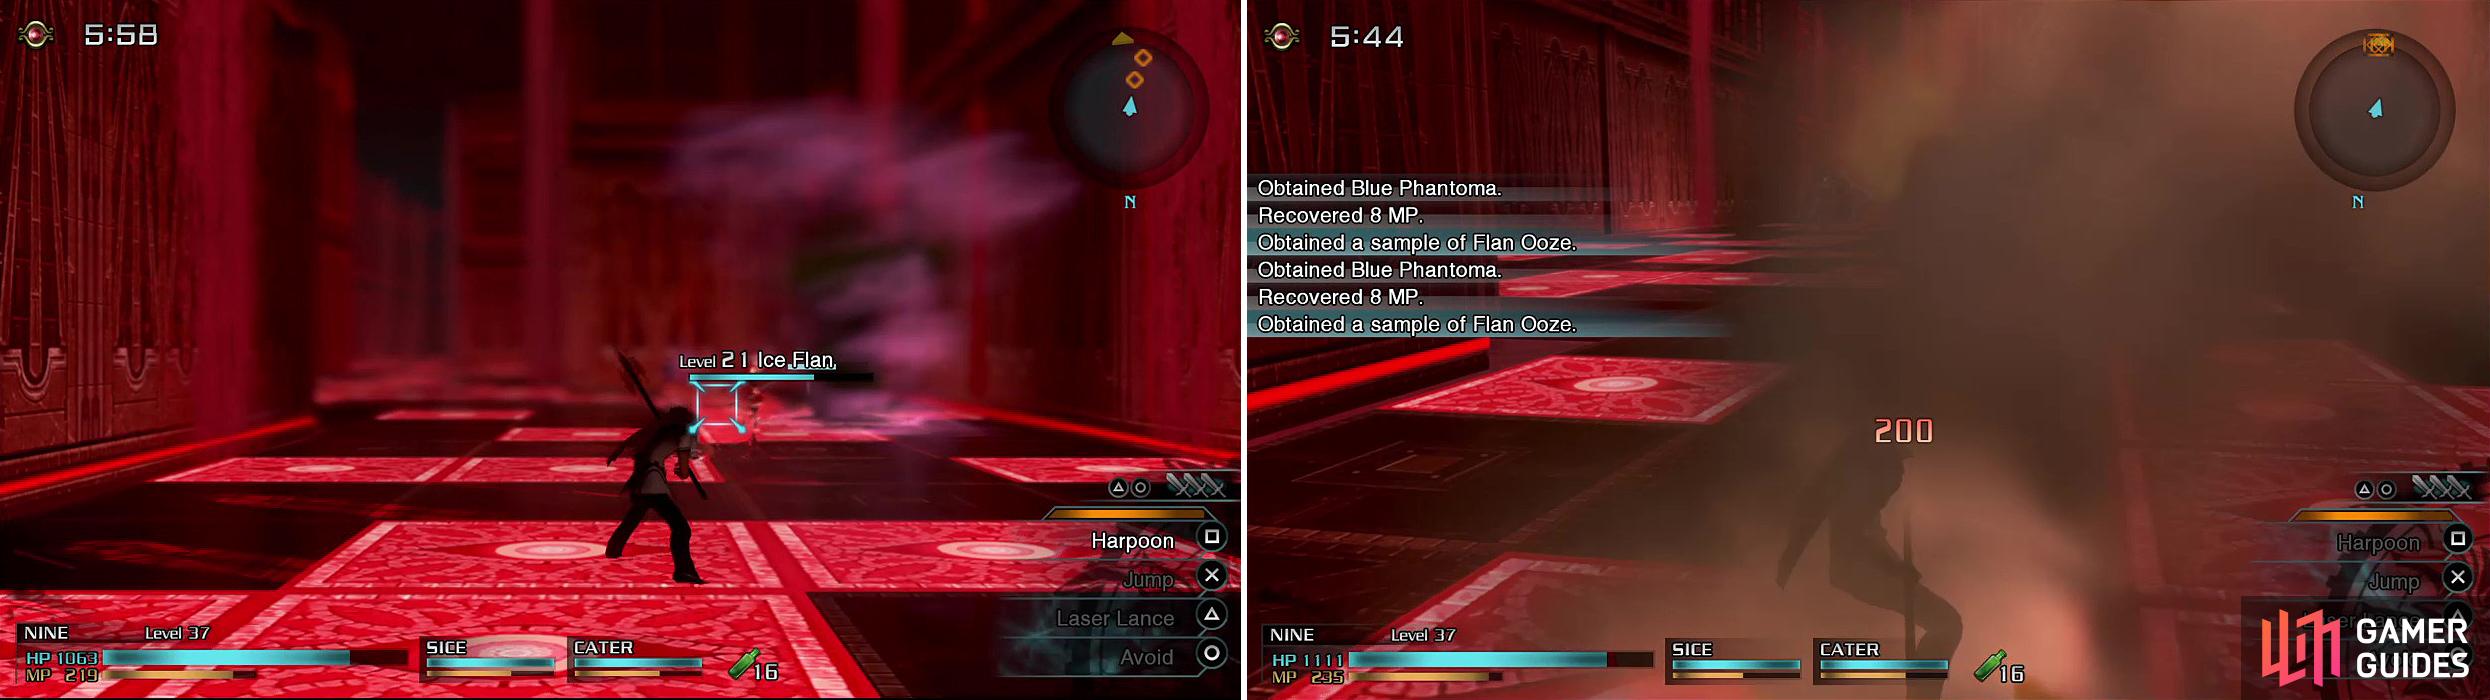 If you stand on the red squares (left) long enough they will do around 200 damage to you (right).